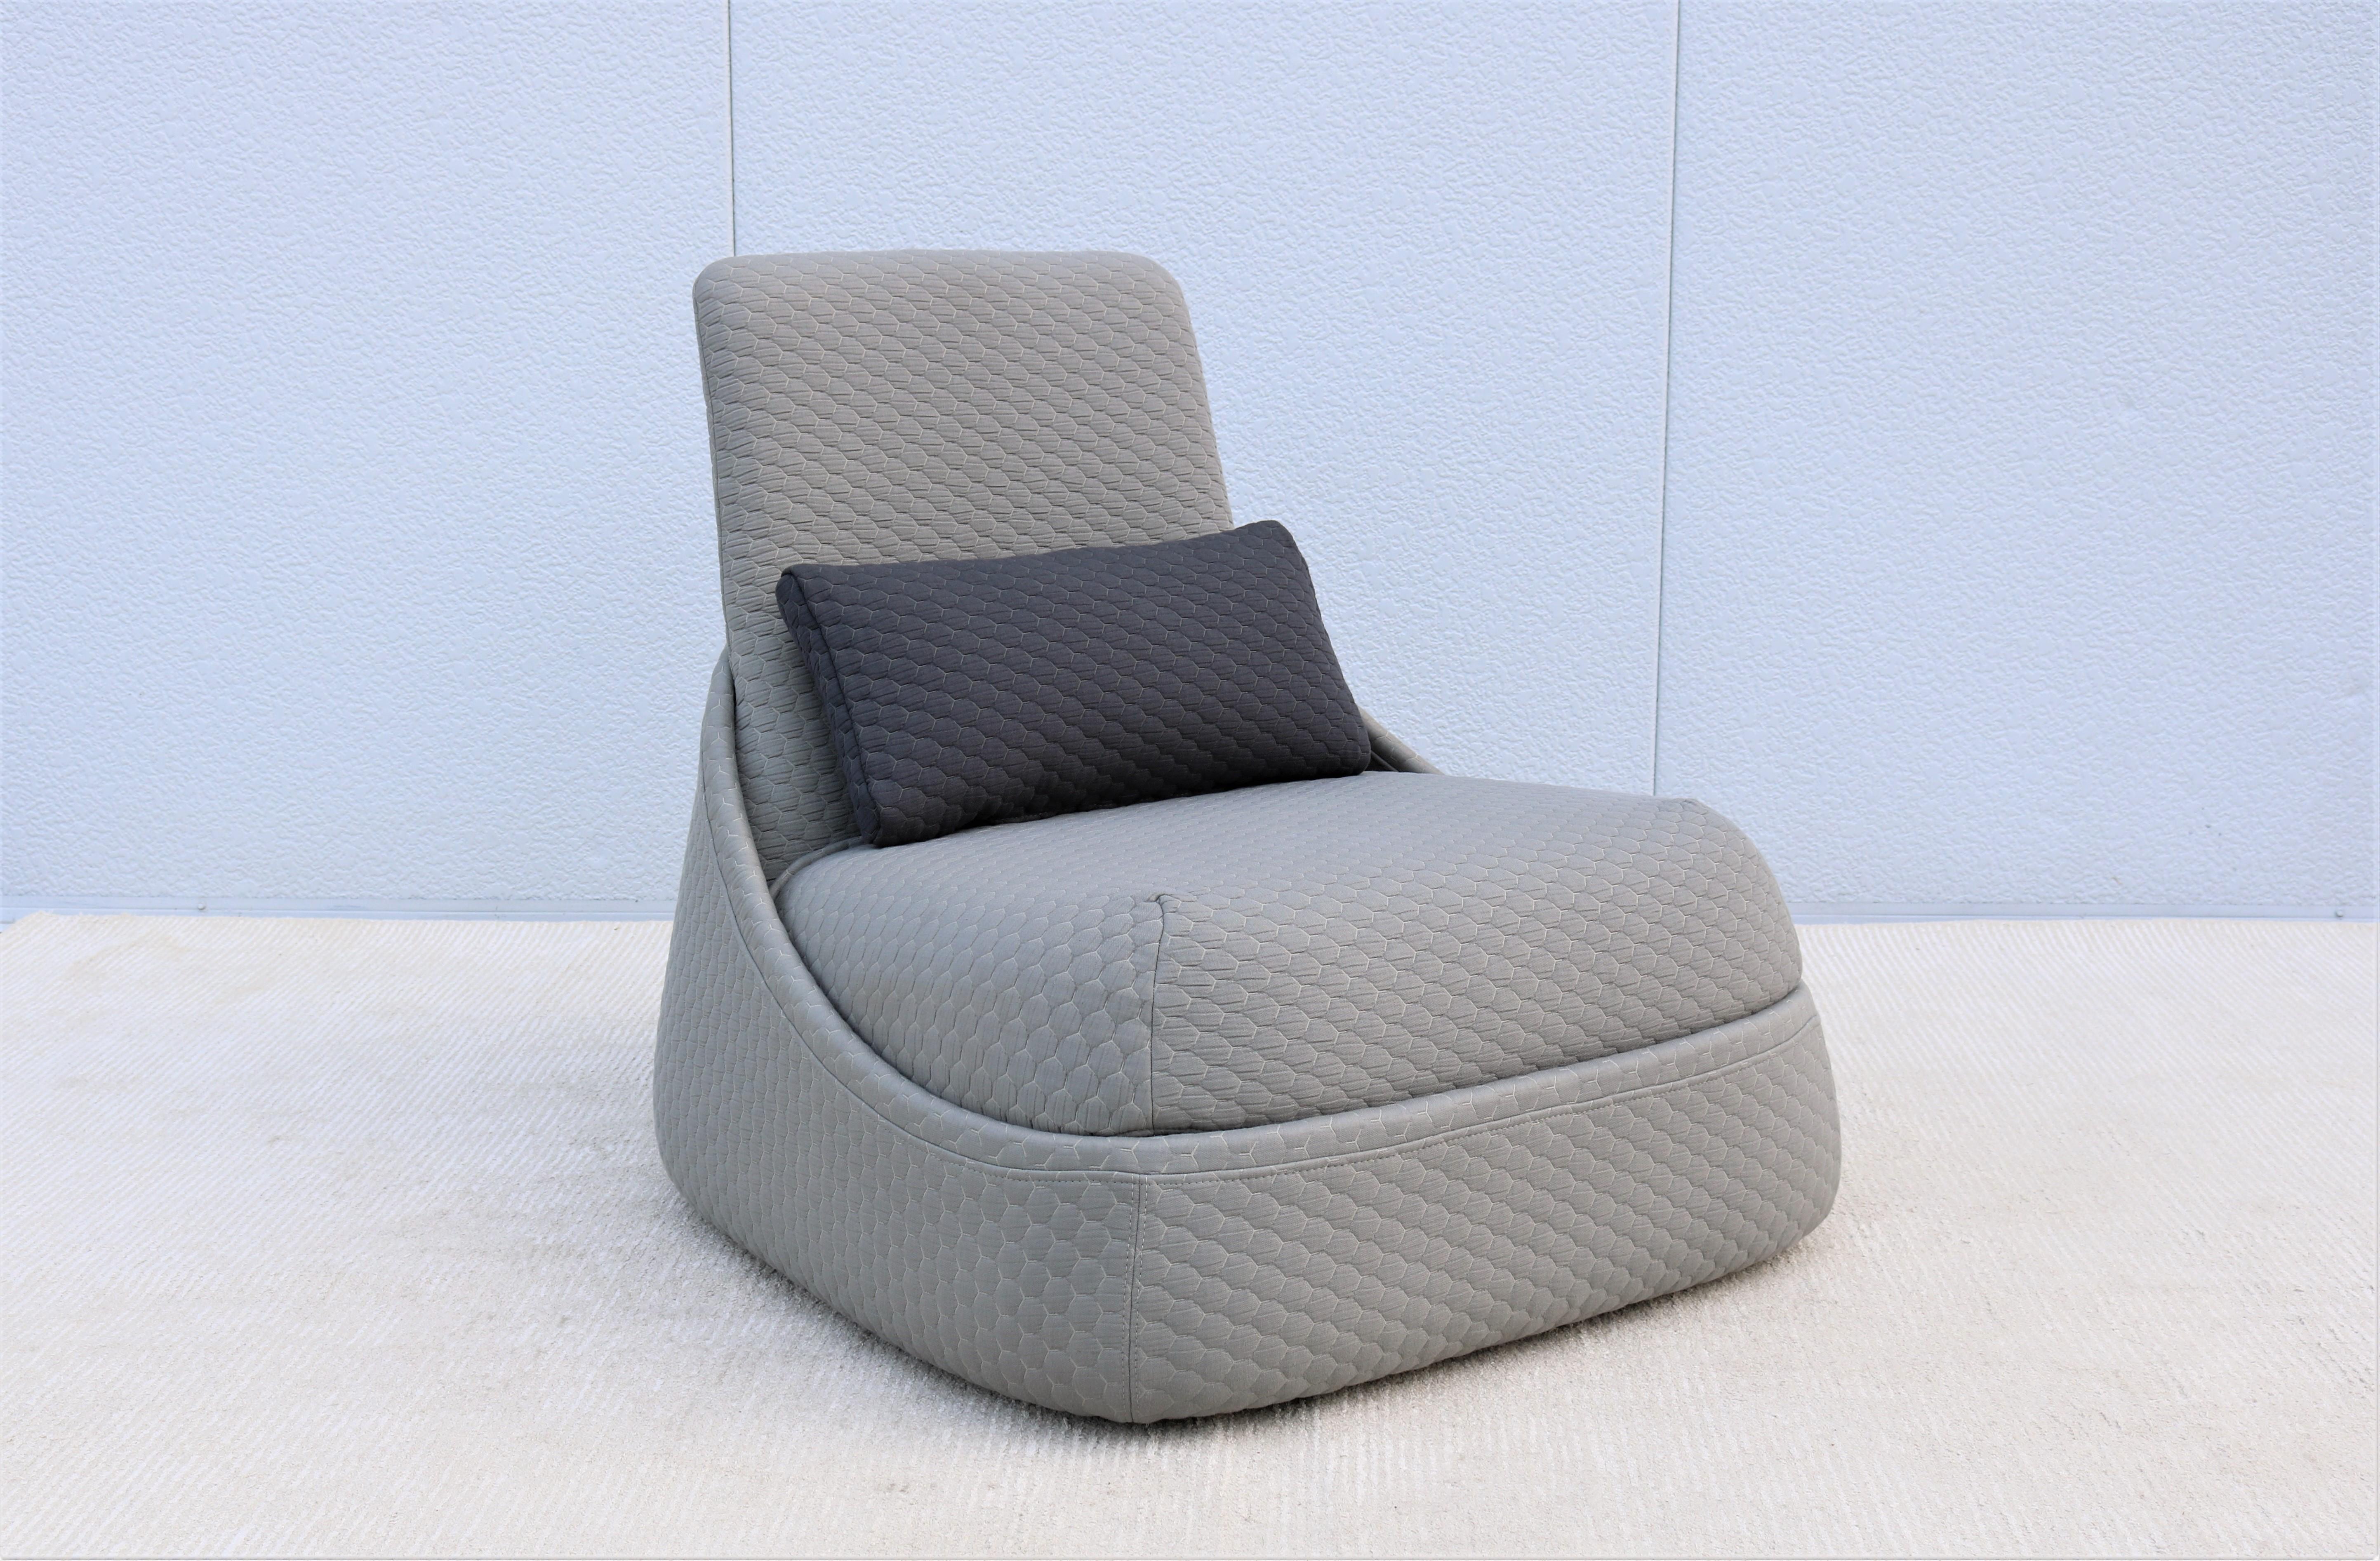 American Modern Patricia Urquiola for Coalesse Hosu Chaise Lounge Chair with Ottoman For Sale